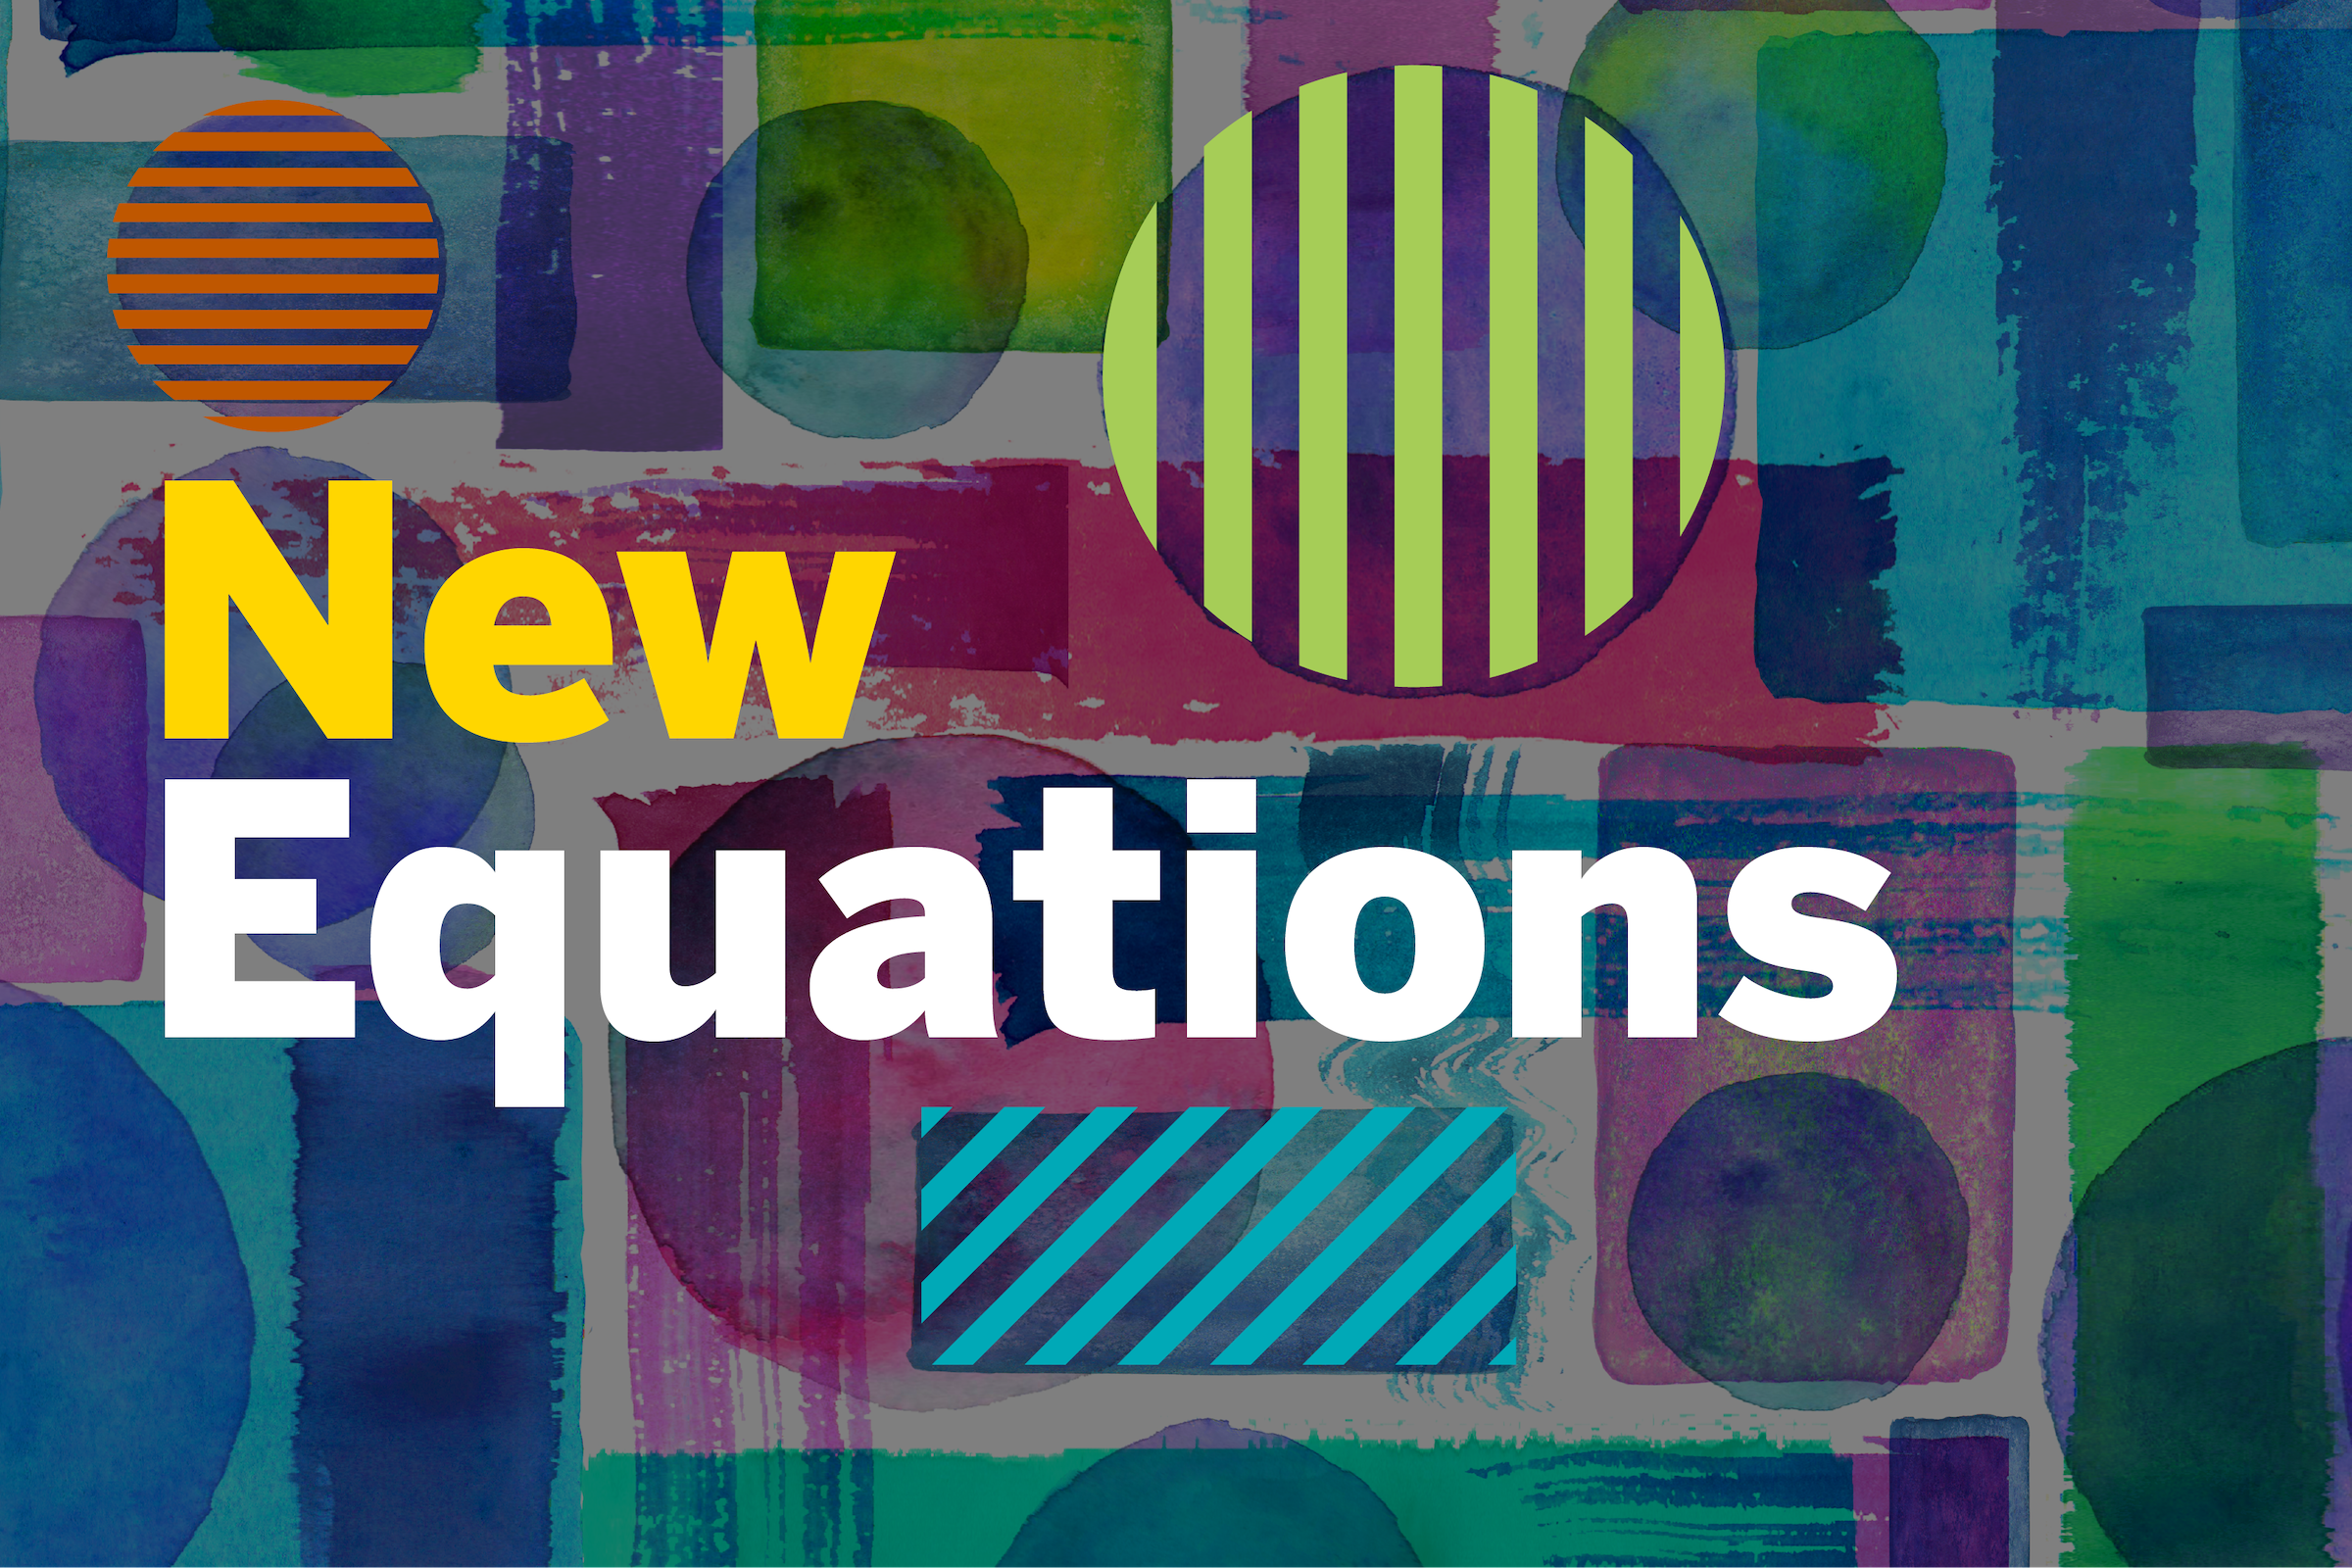 New Equations is written in text on a backdrop of colors, stripes and artistic shapes